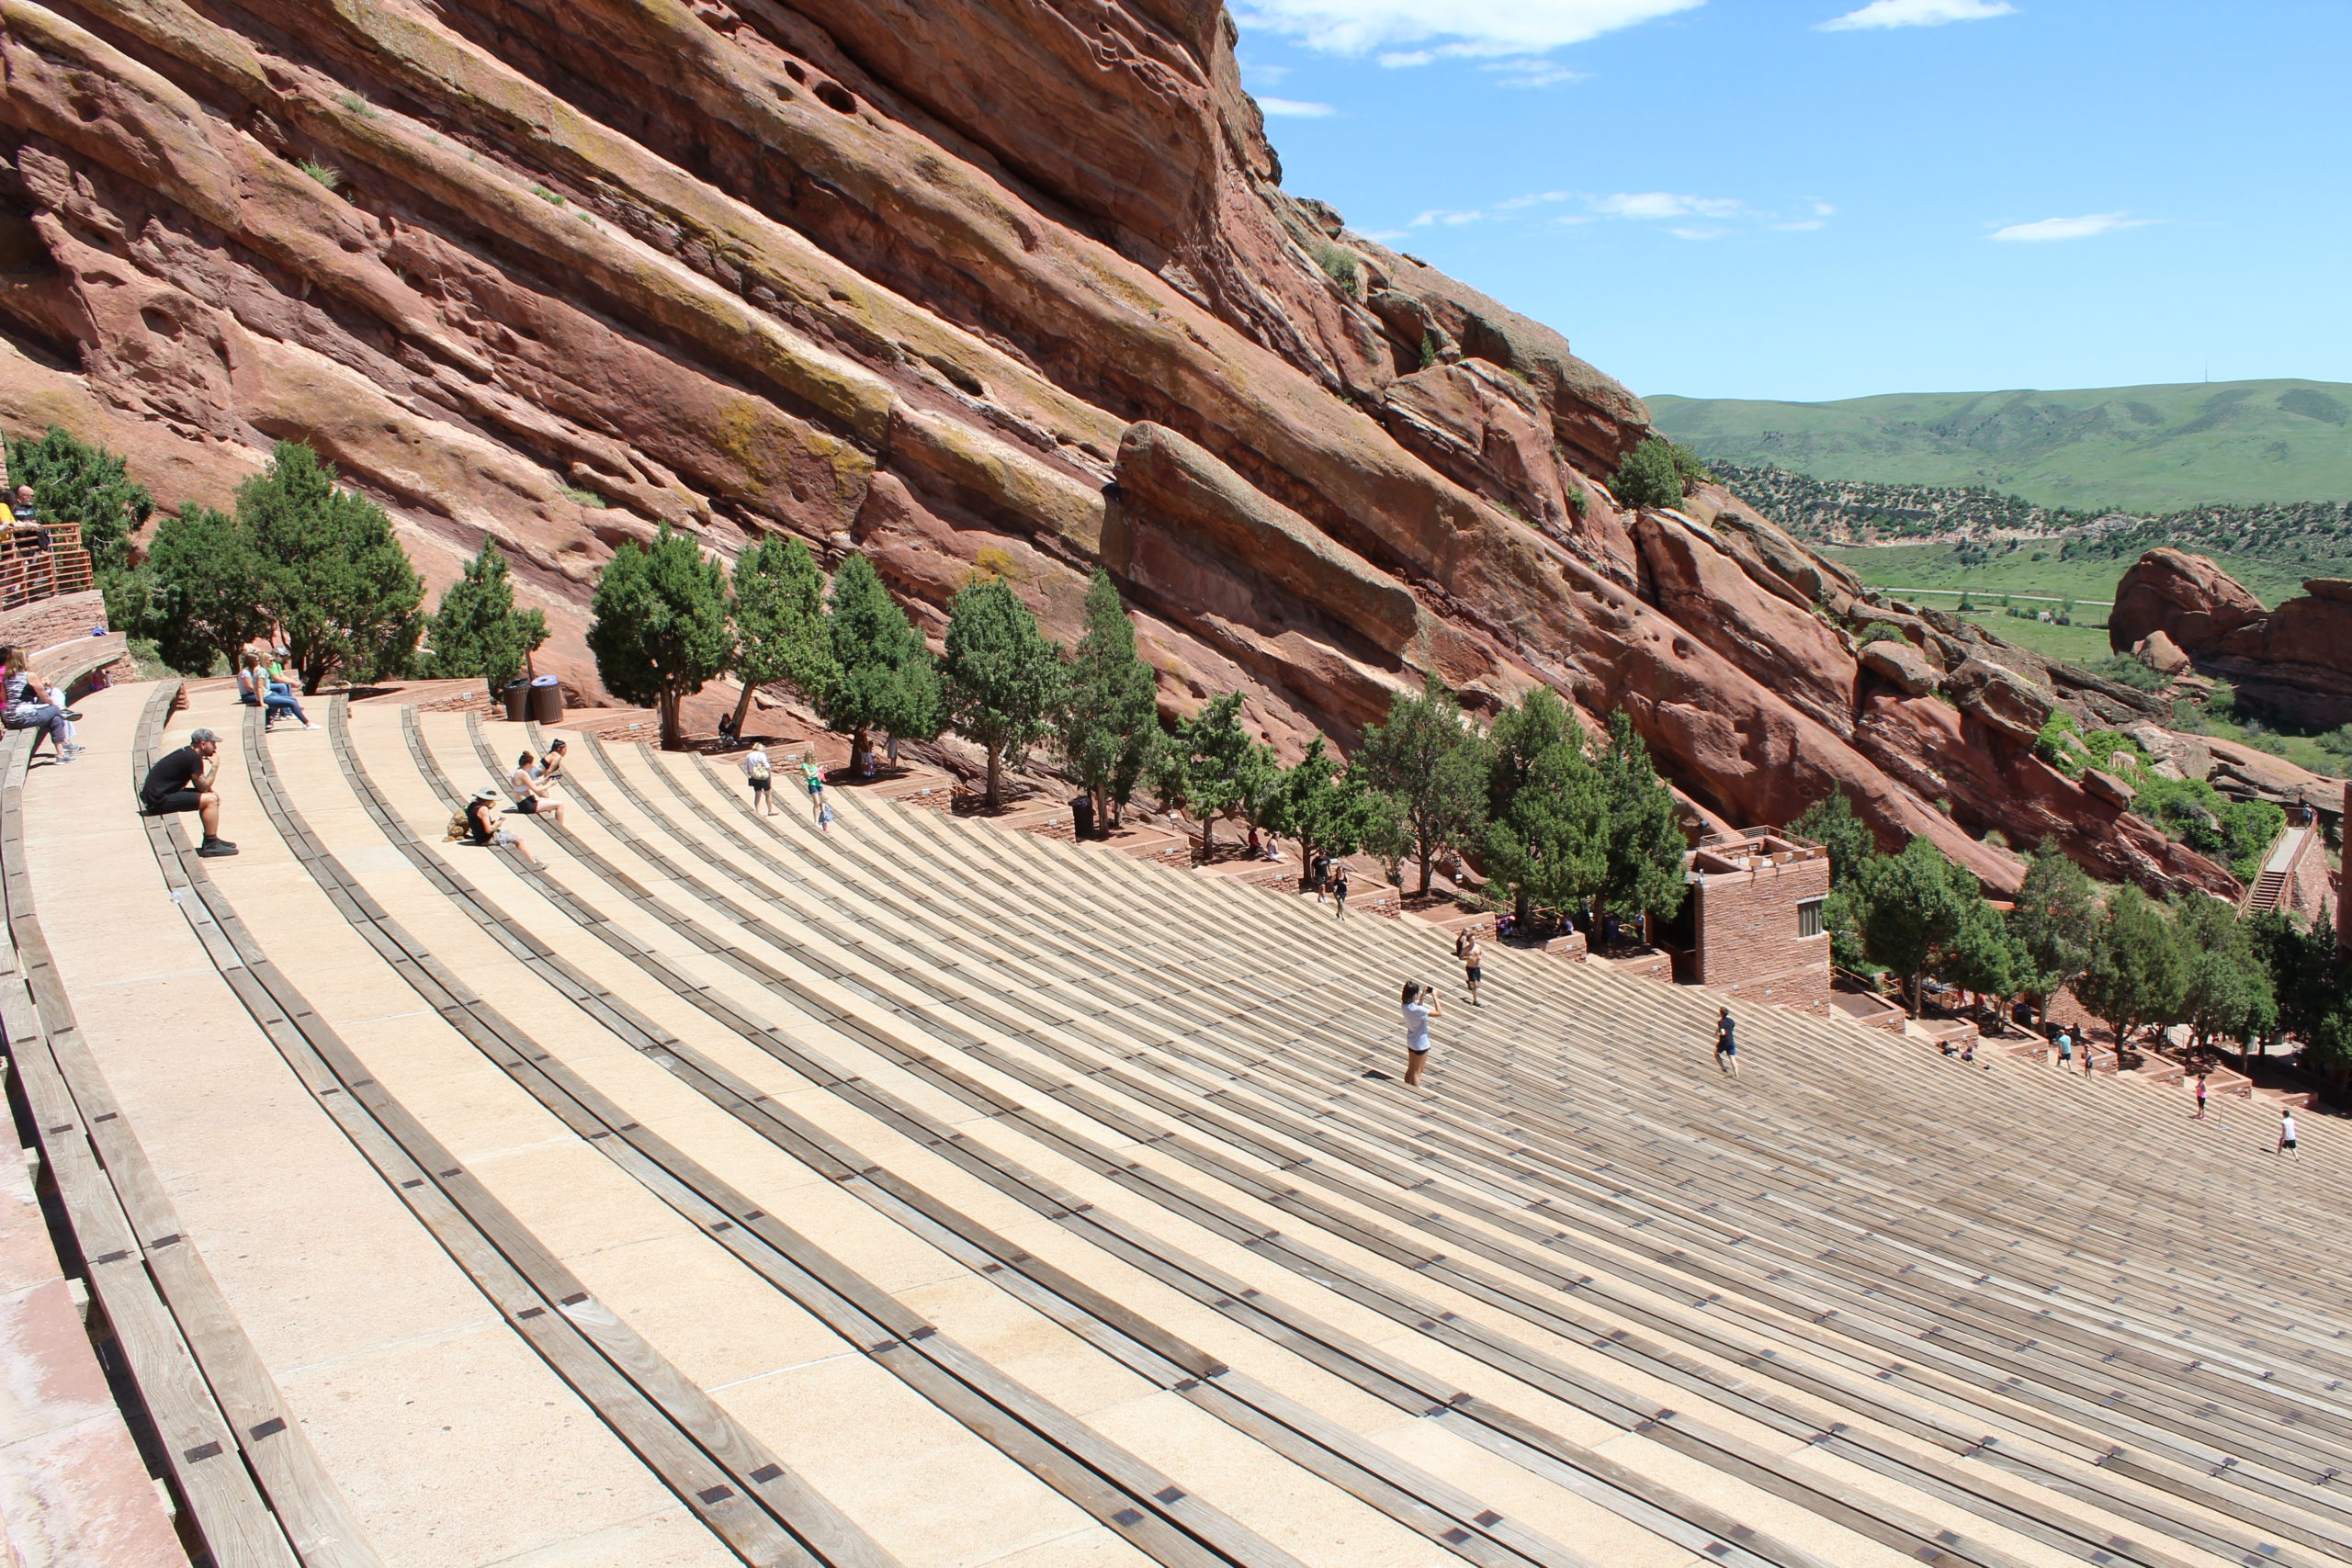 A number of people at Red Rocks Amphitheater on steps, looking down toward the stage with a high red rock wall to the left of the stairs.